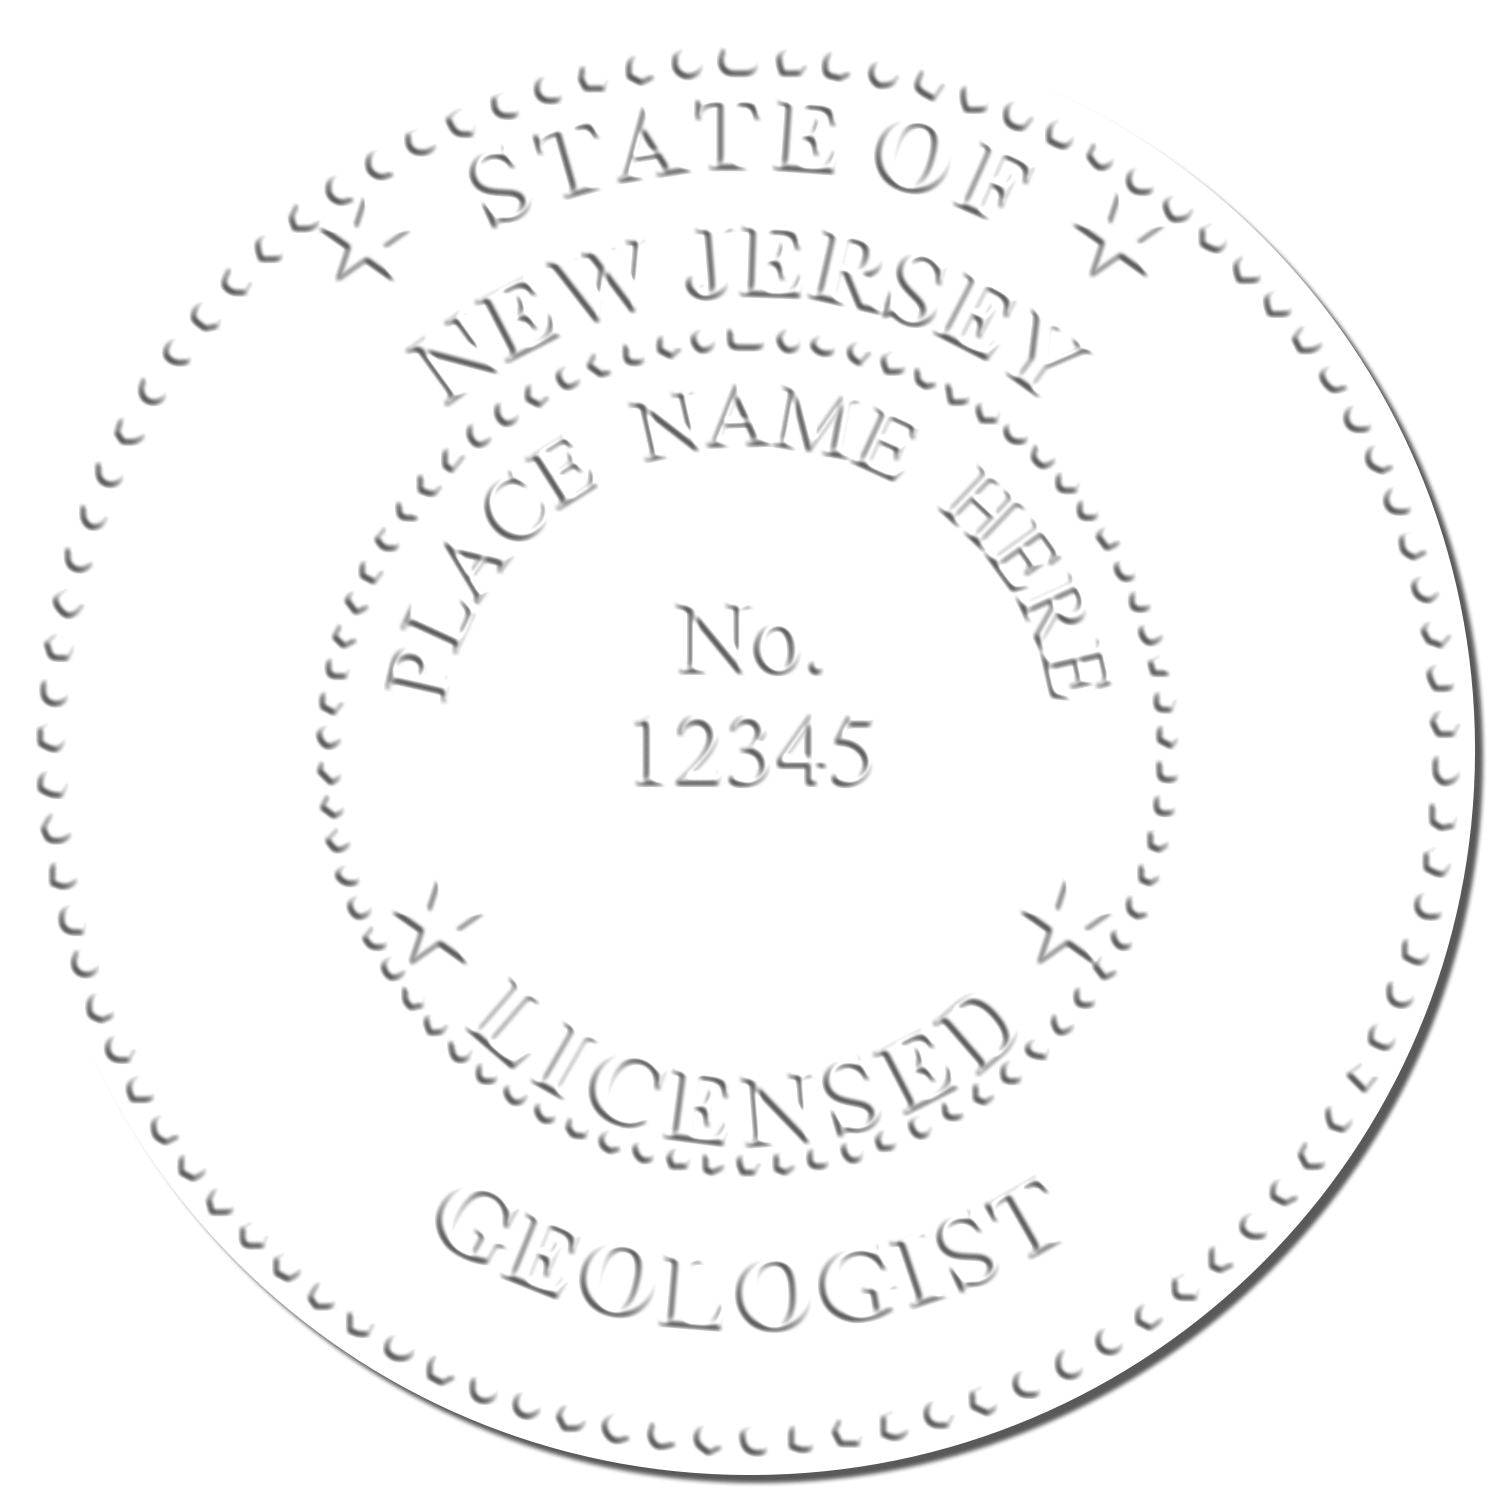 The main image for the New Jersey Geologist Desk Seal depicting a sample of the imprint and imprint sample